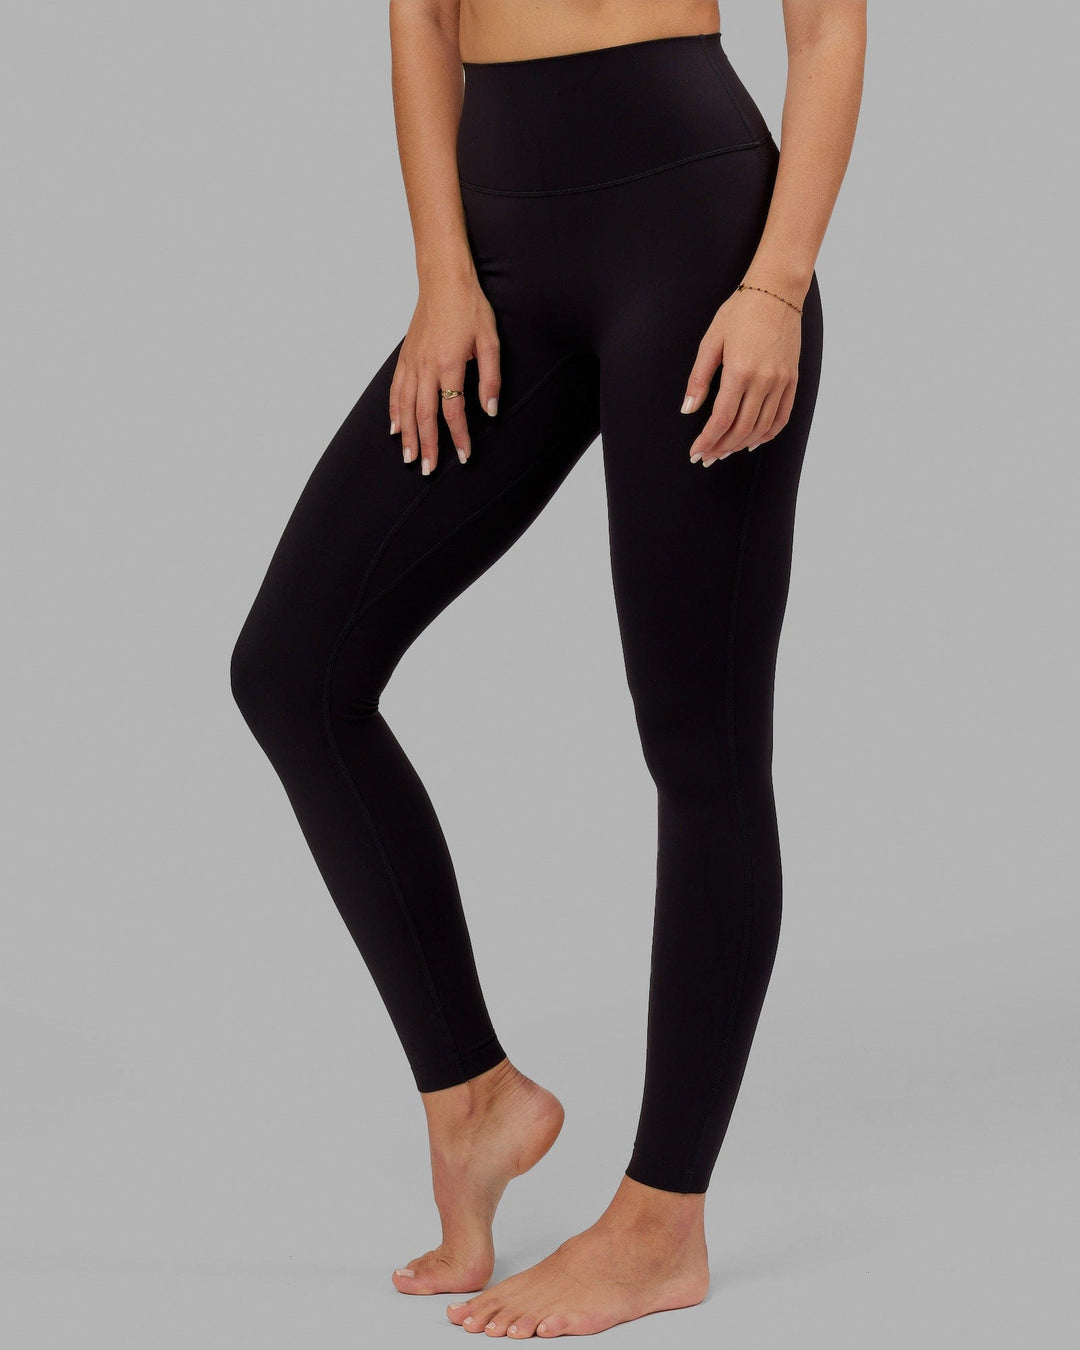 Be The Fusion of Light Leggings (XL) by T Star Collection